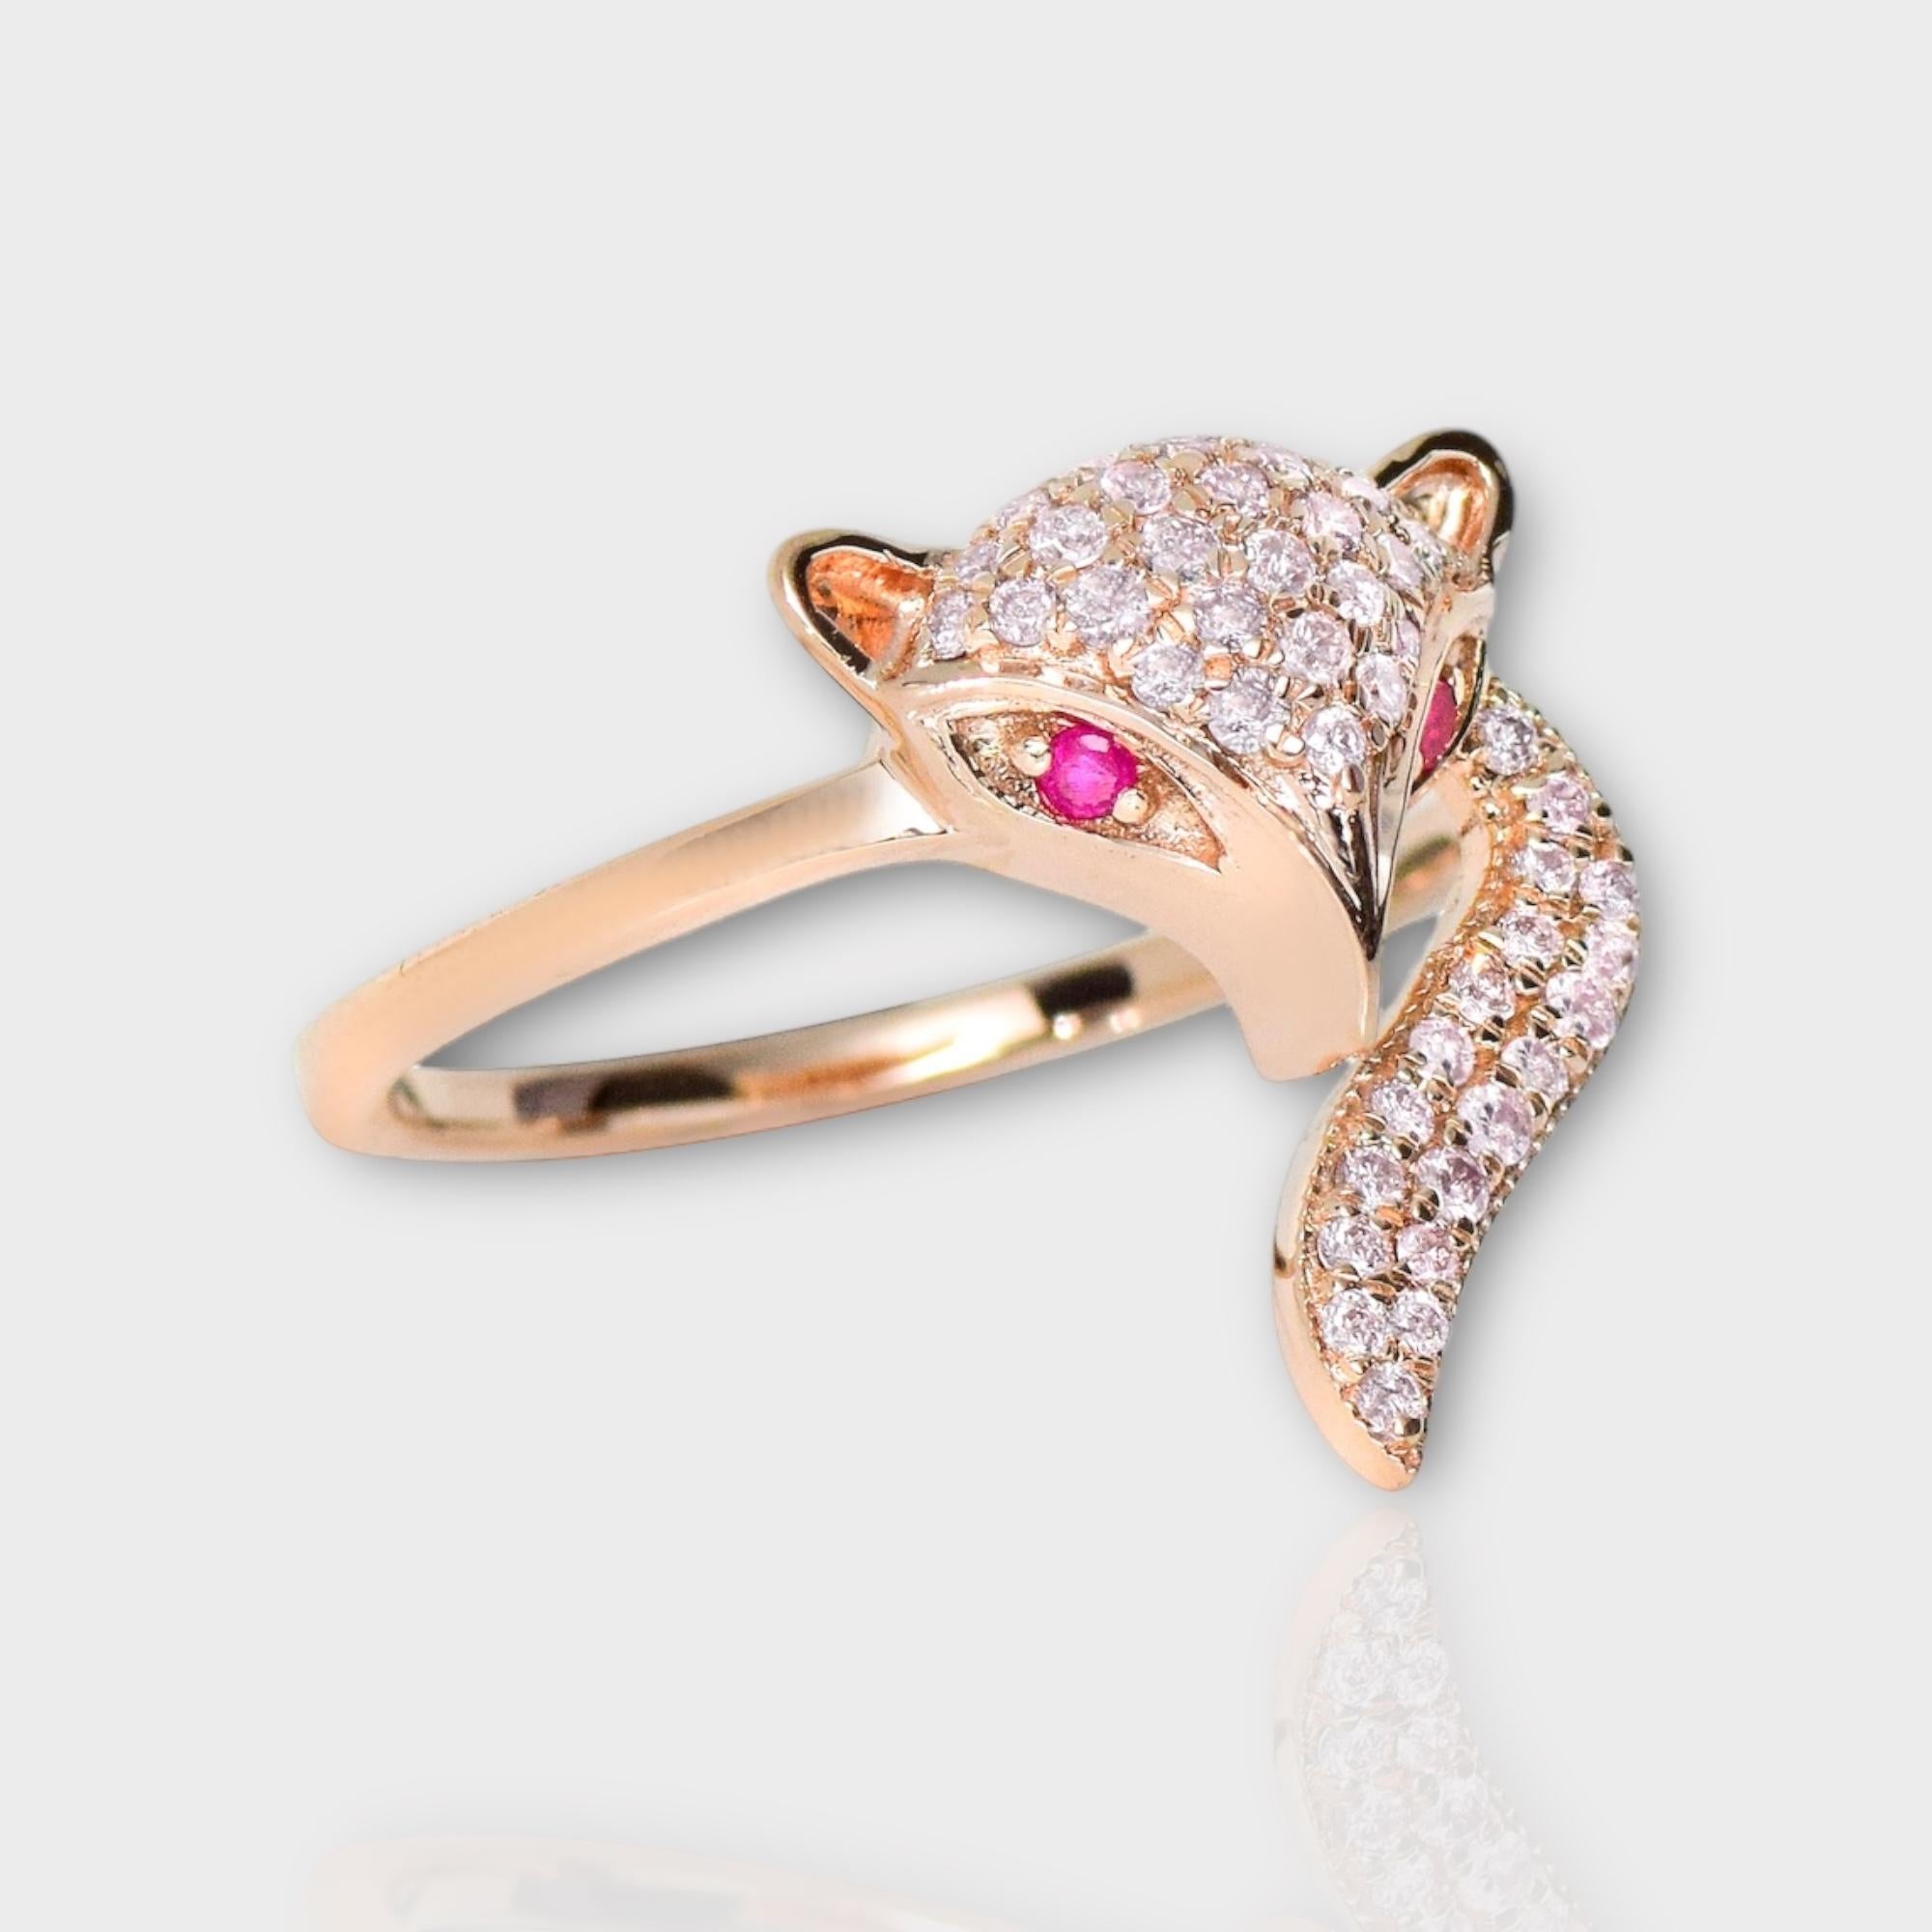 IGI 14K 0.31 ct Natural Pink Diamonds Fox Design Antique Art Deco Ring In New Condition For Sale In Kaohsiung City, TW